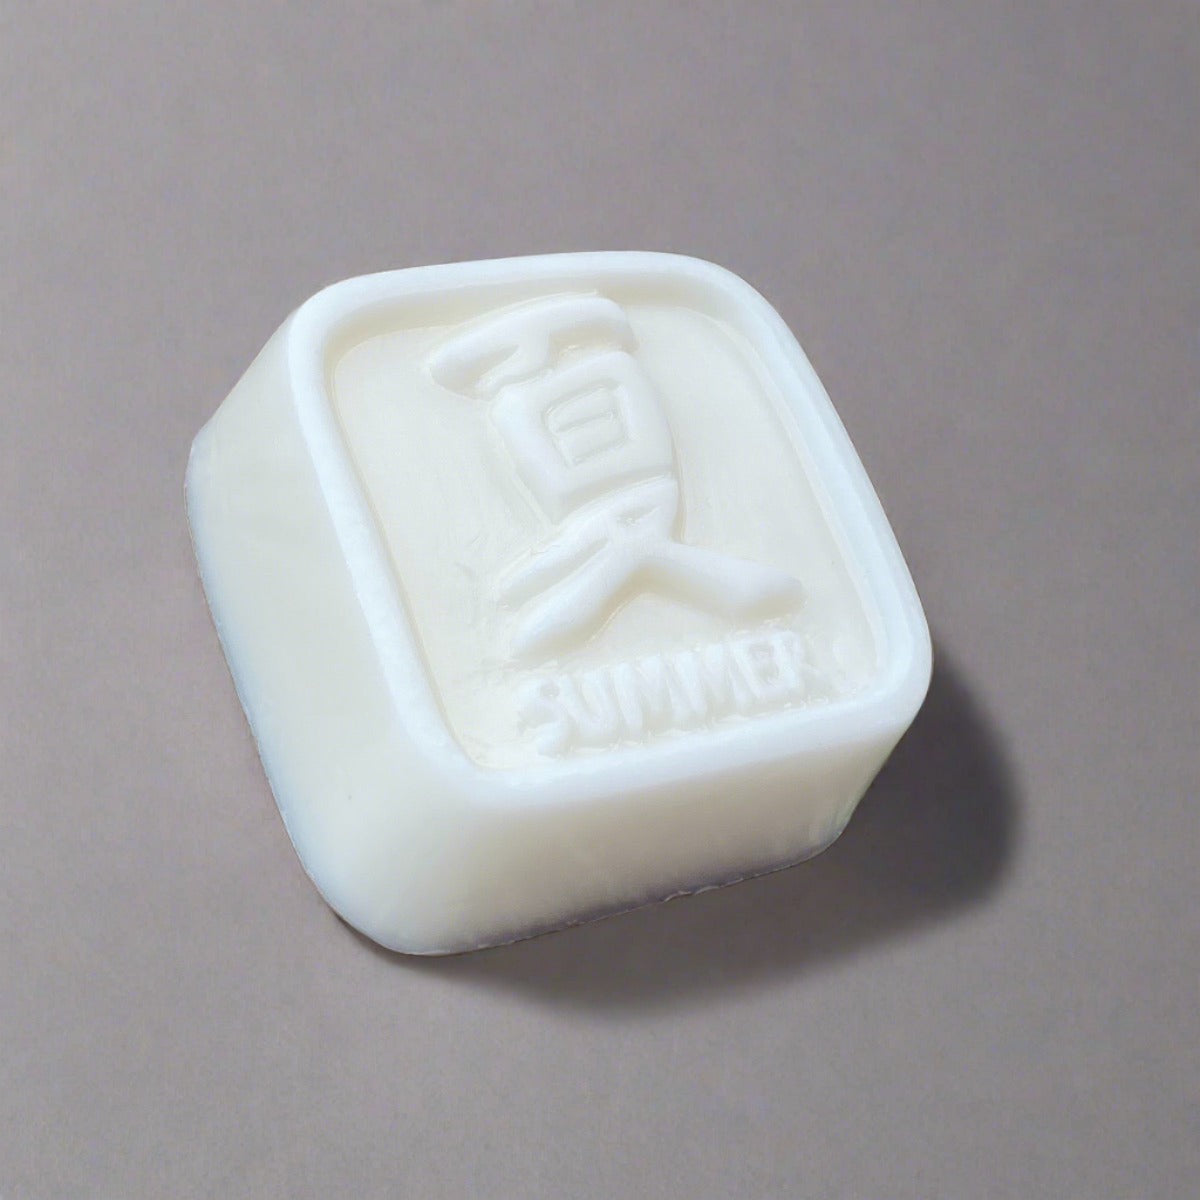 Bar of white soap with beautiful Chinese symbols meaning "summer" design